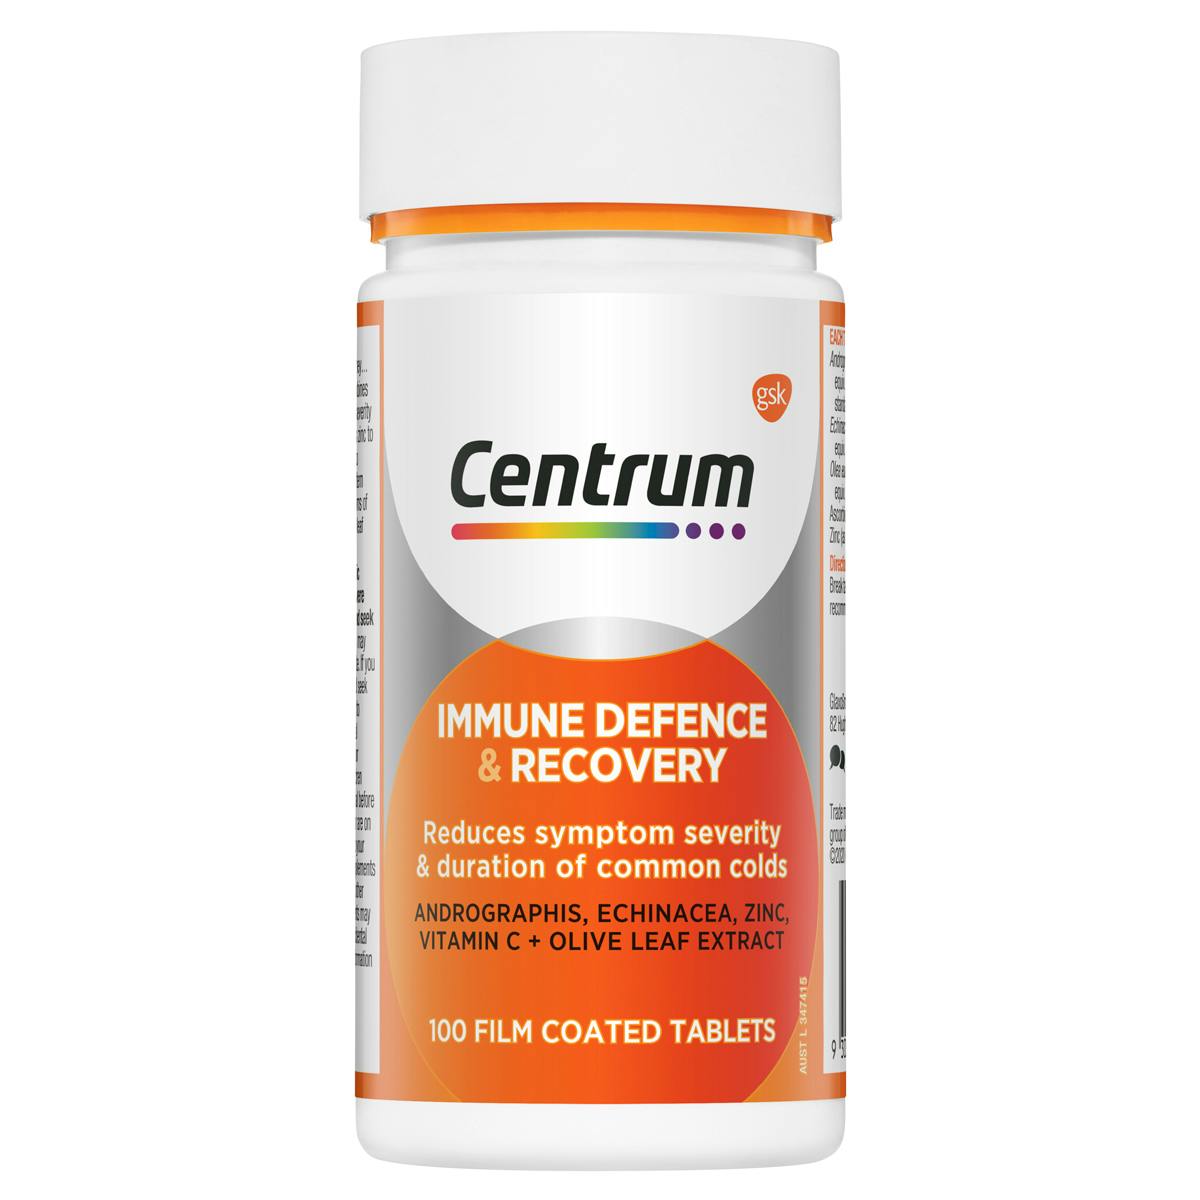 Bottle of Immune Defence & Recovery from the Centrum Benefits Blend (50 tablets).